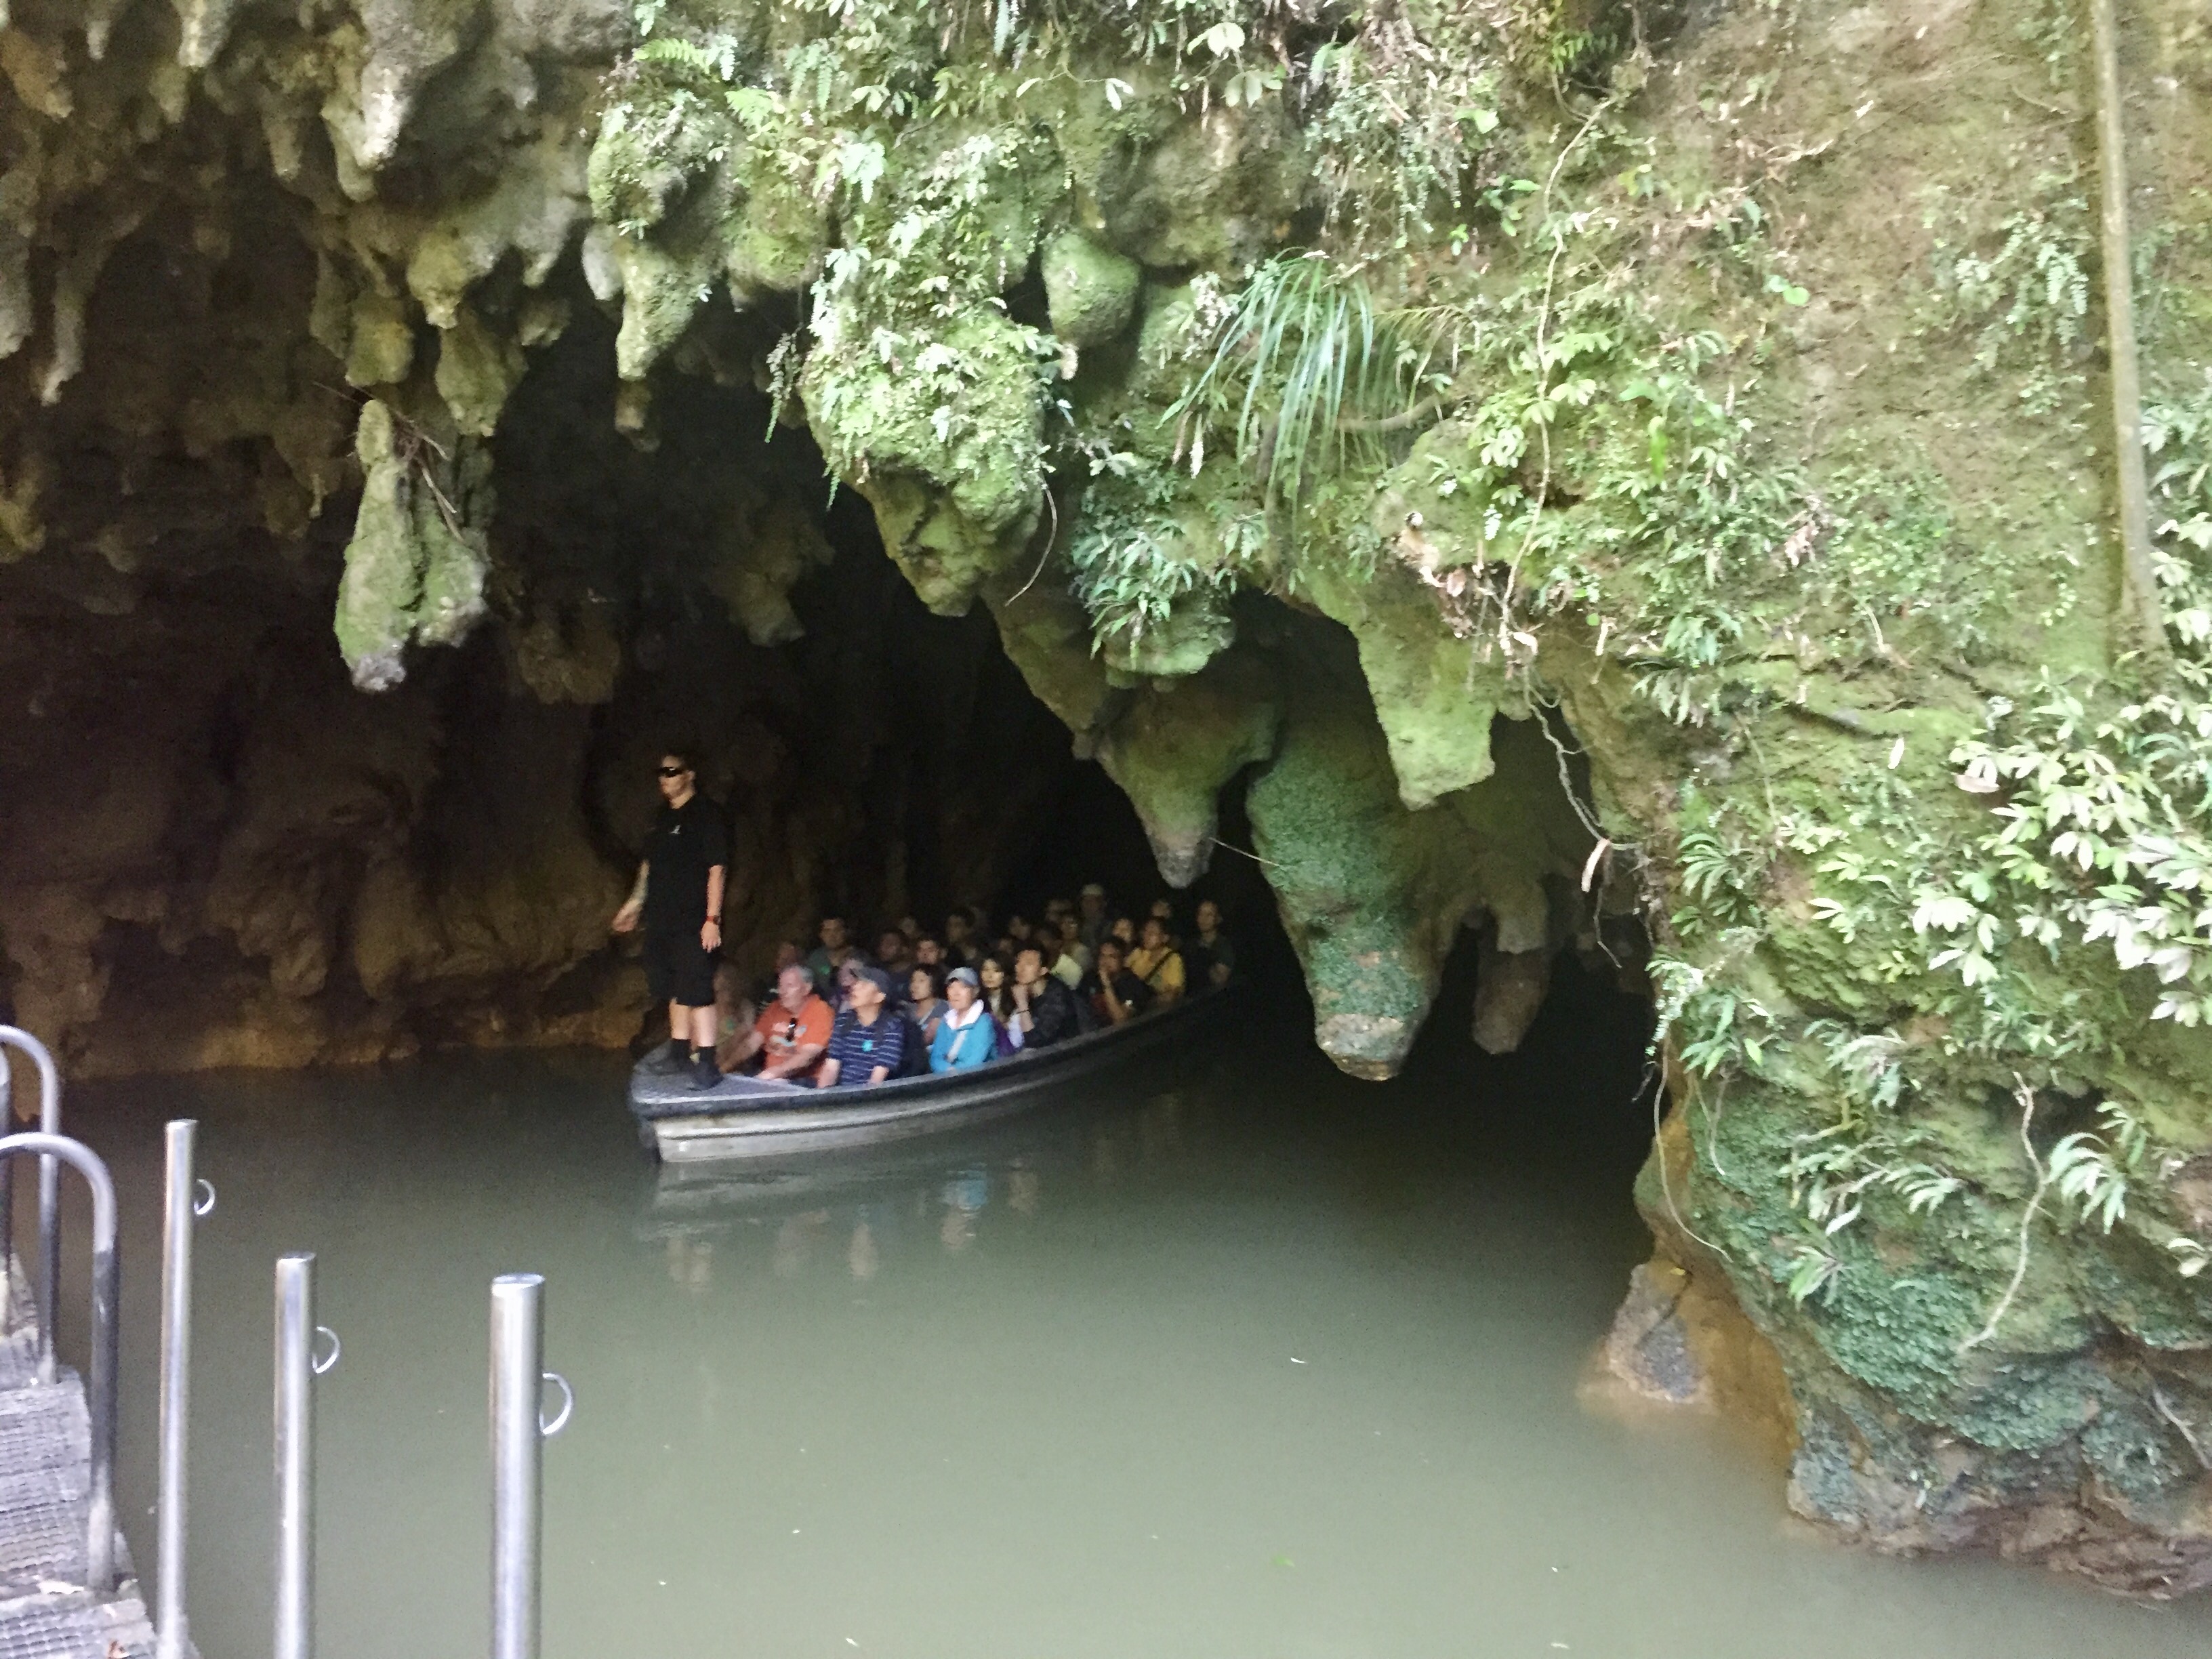 Outside of the Waitomo Glowworm Caves in New Zealand